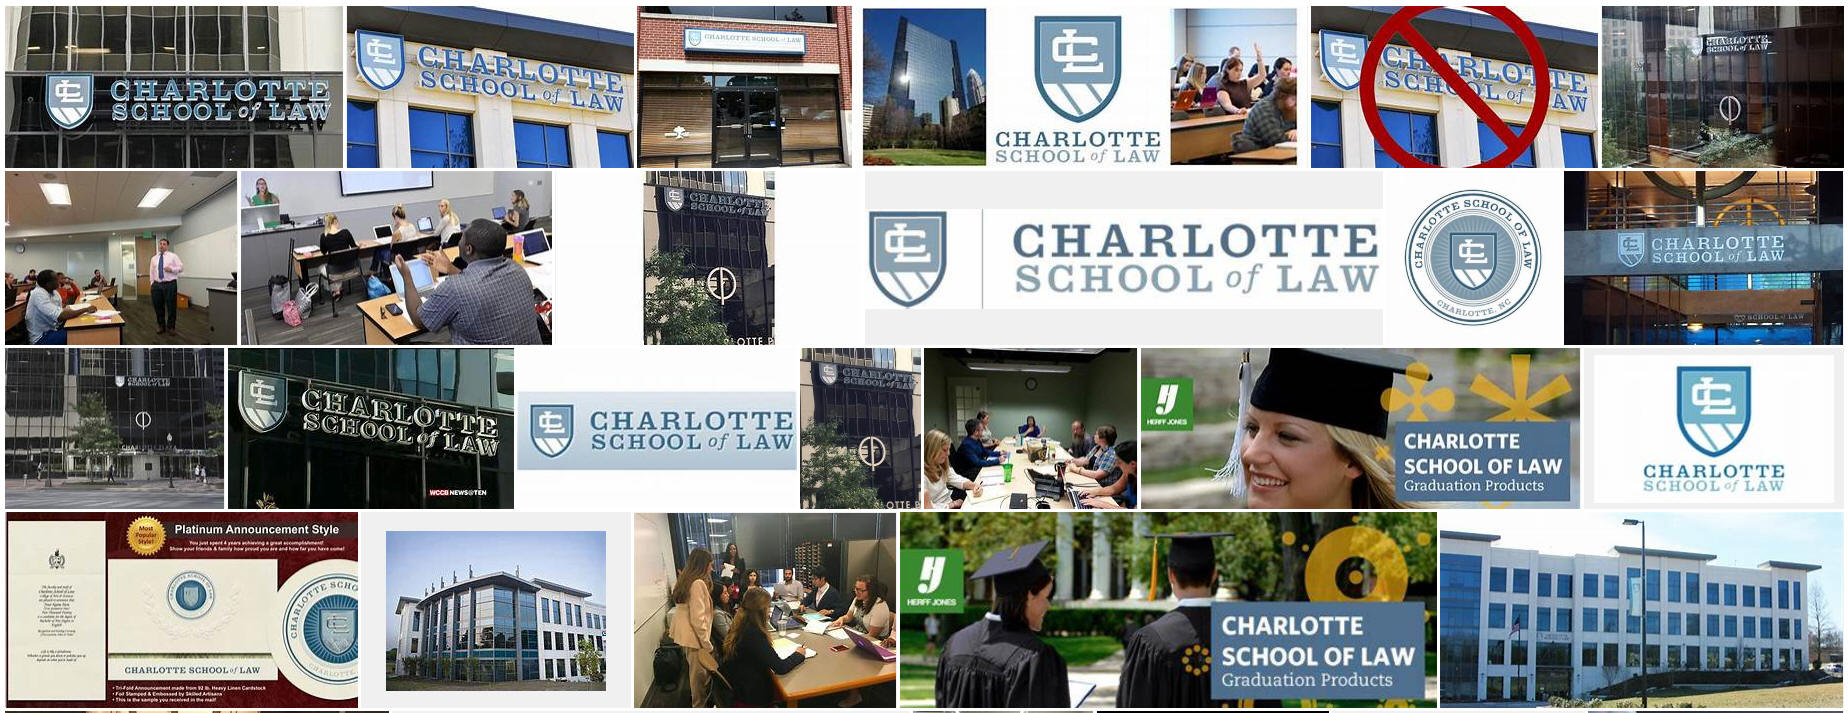 Charlotte School of Law Ranking, Tuition Cost, Average LSAT Scores, GPA,  Acceptance Rate